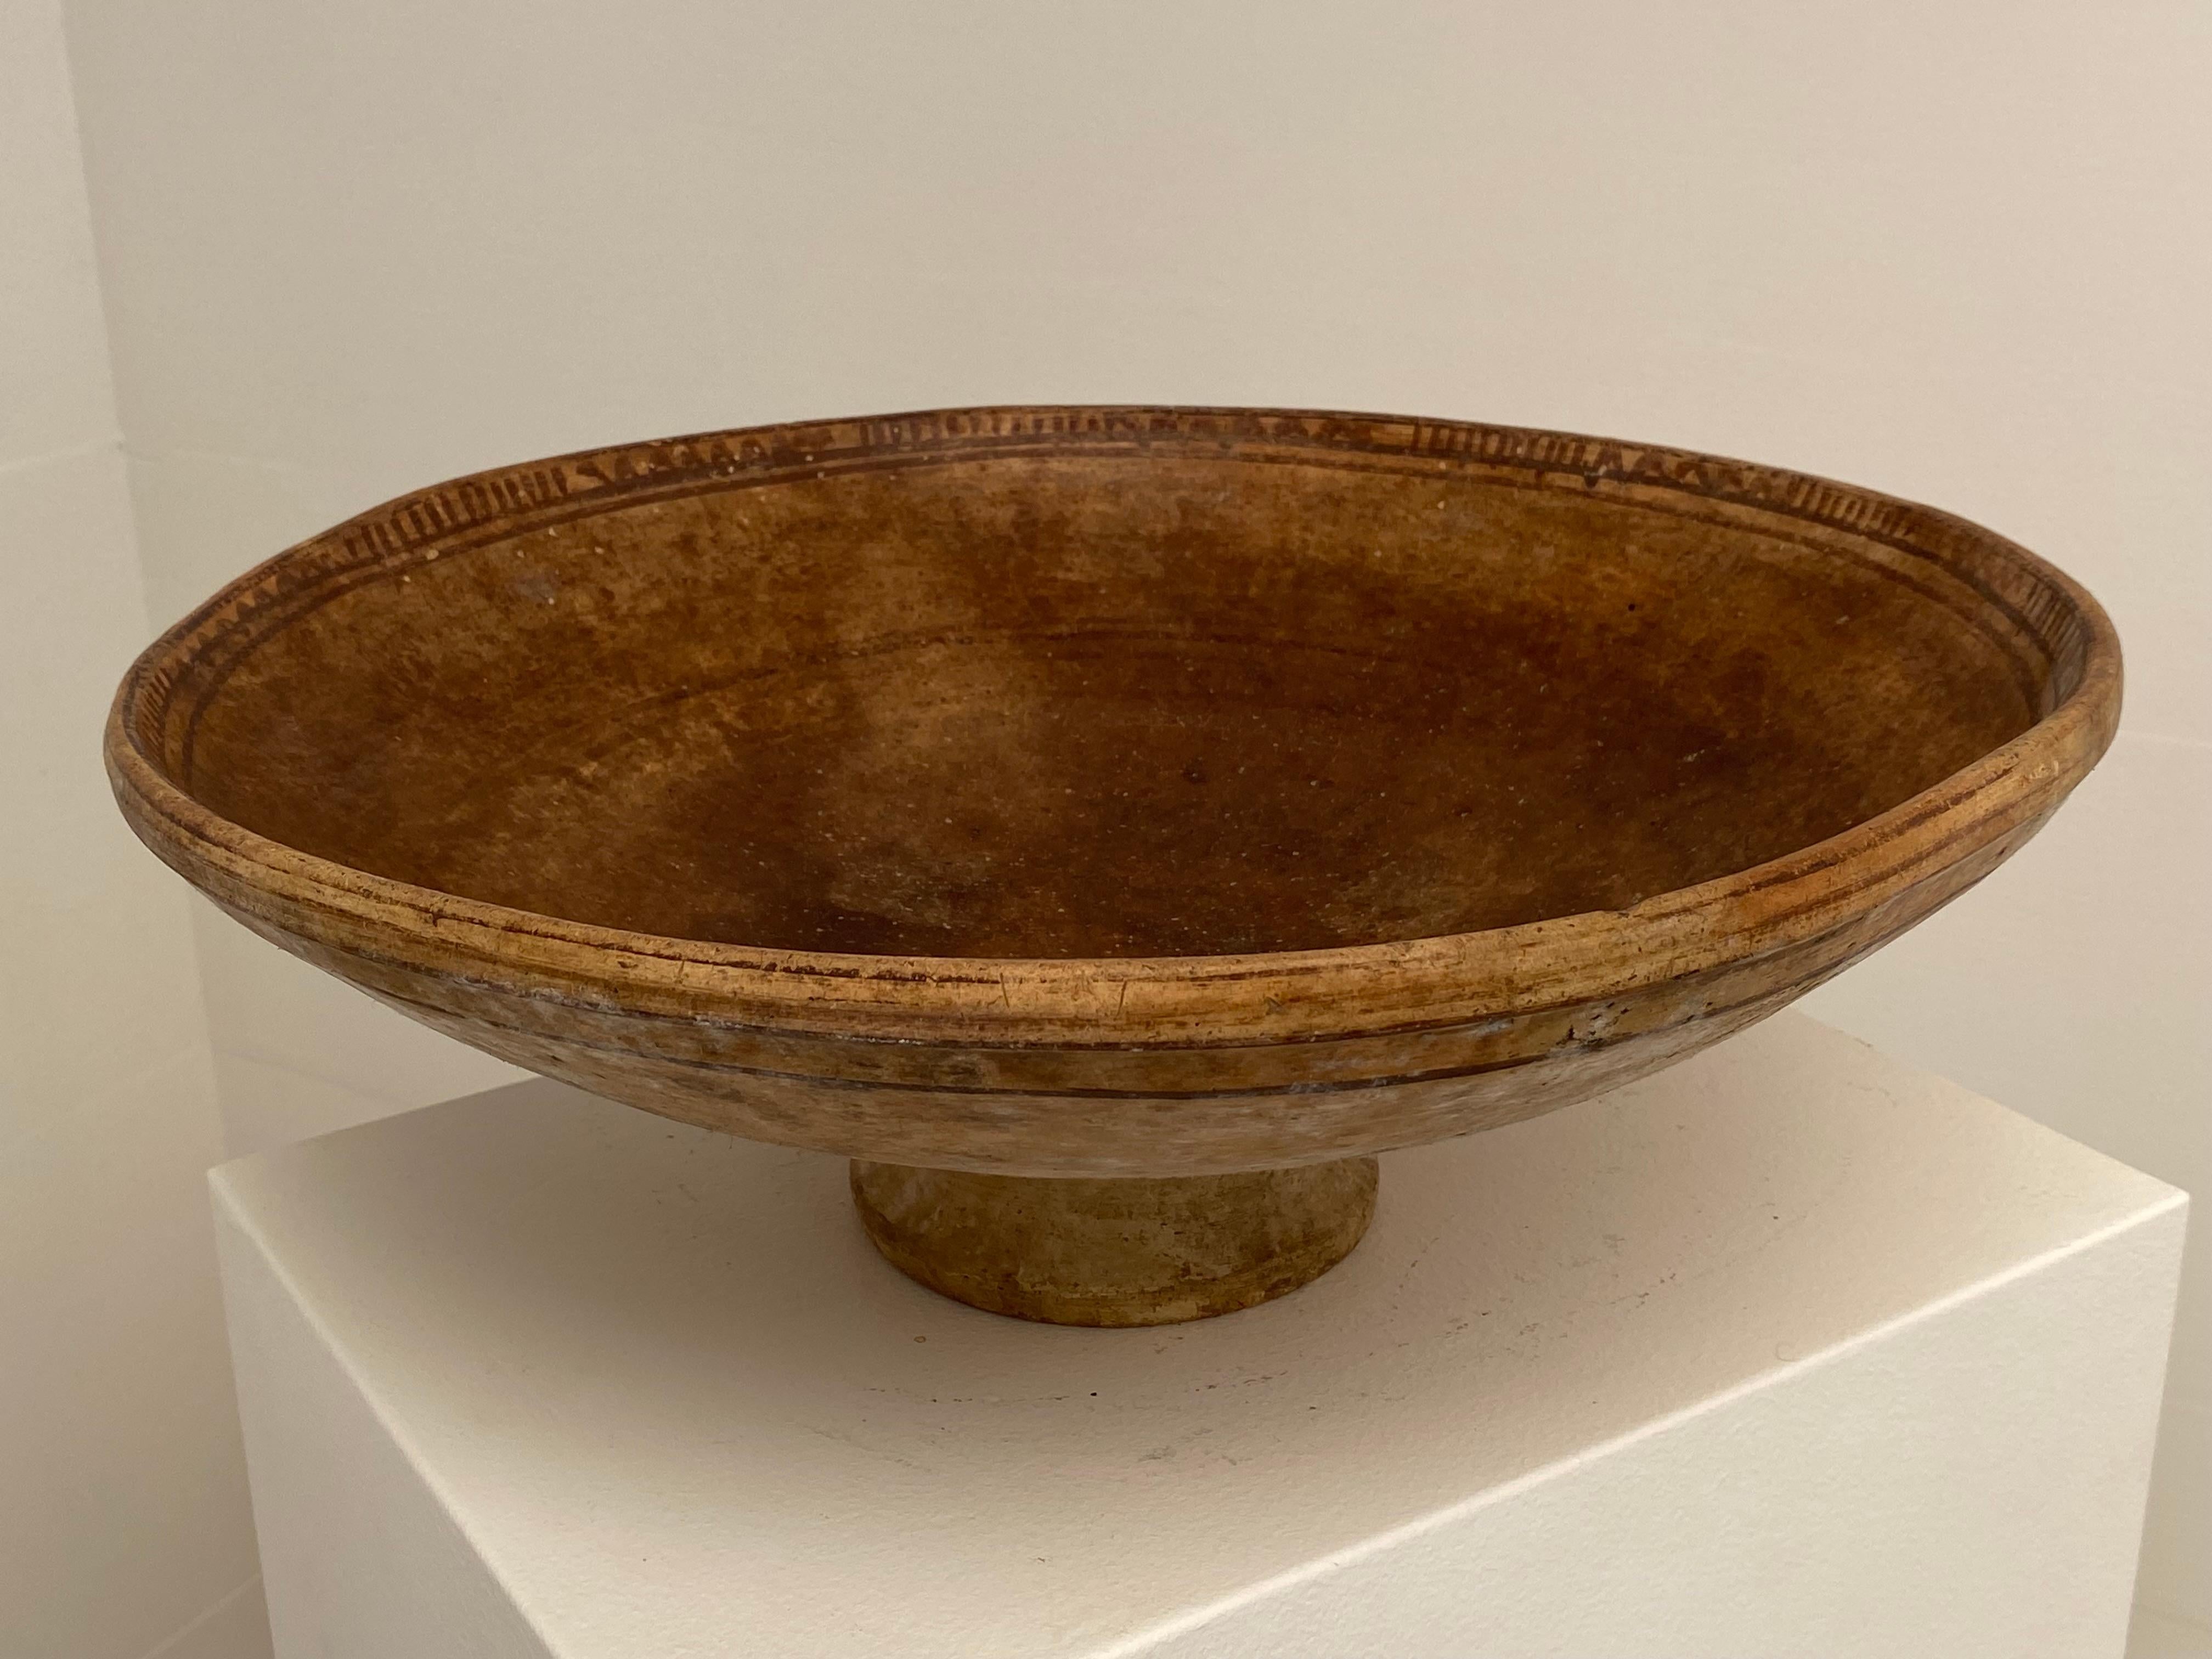 Antique, Terracotta Berber Bowl on a central foot For Sale 11